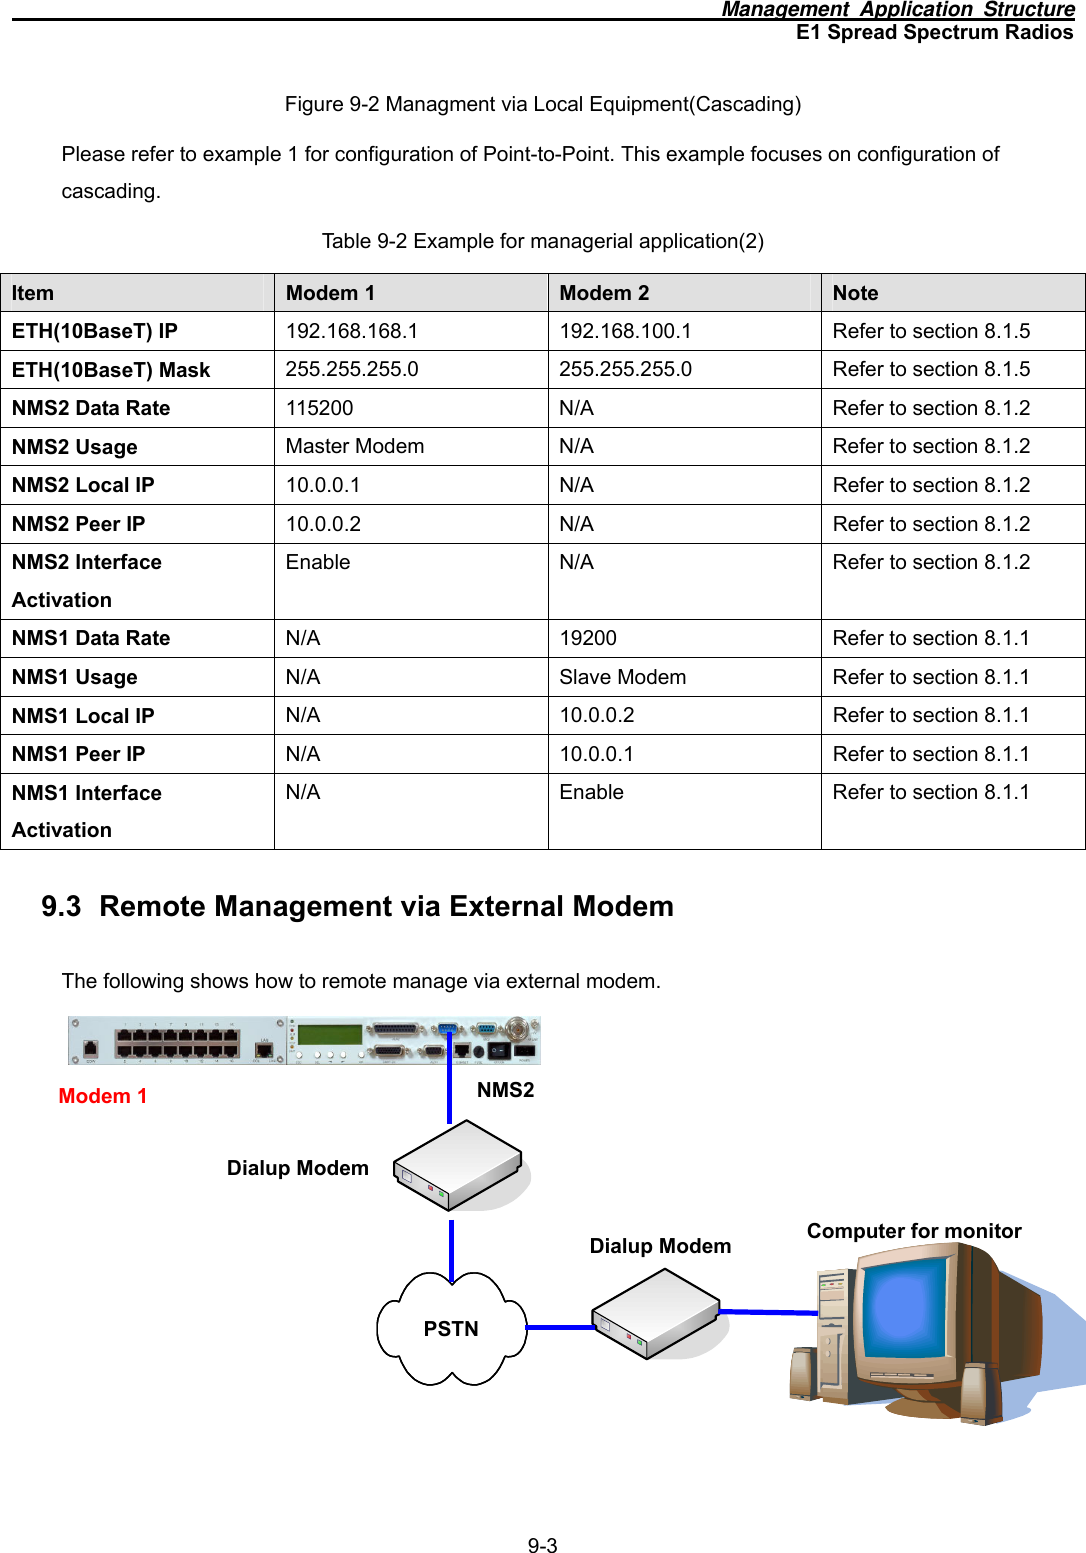                                                                     Management Application Structure E1 Spread Spectrum Radios 9-3 Figure 9-2 Managment via Local Equipment(Cascading) Please refer to example 1 for configuration of Point-to-Point. This example focuses on configuration of cascading.  Table 9-2 Example for managerial application(2) Item  Modem 1  Modem 2  Note ETH(10BaseT) IP  192.168.168.1 192.168.100.1 Refer to section 8.1.5 ETH(10BaseT) Mask  255.255.255.0 255.255.255.0 Refer to section 8.1.5 NMS2 Data Rate  115200  N/A  Refer to section 8.1.2 NMS2 Usage  Master Modem  N/A  Refer to section 8.1.2 NMS2 Local IP  10.0.0.1  N/A  Refer to section 8.1.2 NMS2 Peer IP  10.0.0.2  N/A  Refer to section 8.1.2 NMS2 Interface Activation Enable  N/A  Refer to section 8.1.2 NMS1 Data Rate  N/A  19200  Refer to section 8.1.1 NMS1 Usage  N/A  Slave Modem  Refer to section 8.1.1 NMS1 Local IP  N/A  10.0.0.2  Refer to section 8.1.1 NMS1 Peer IP  N/A  10.0.0.1  Refer to section 8.1.1 NMS1 Interface Activation N/A  Enable  Refer to section 8.1.1 9.3 Remote Management via External Modem The following shows how to remote manage via external modem.             NMS2Computer for monitor Dialup Modem PSTN Dialup Modem Modem 1 